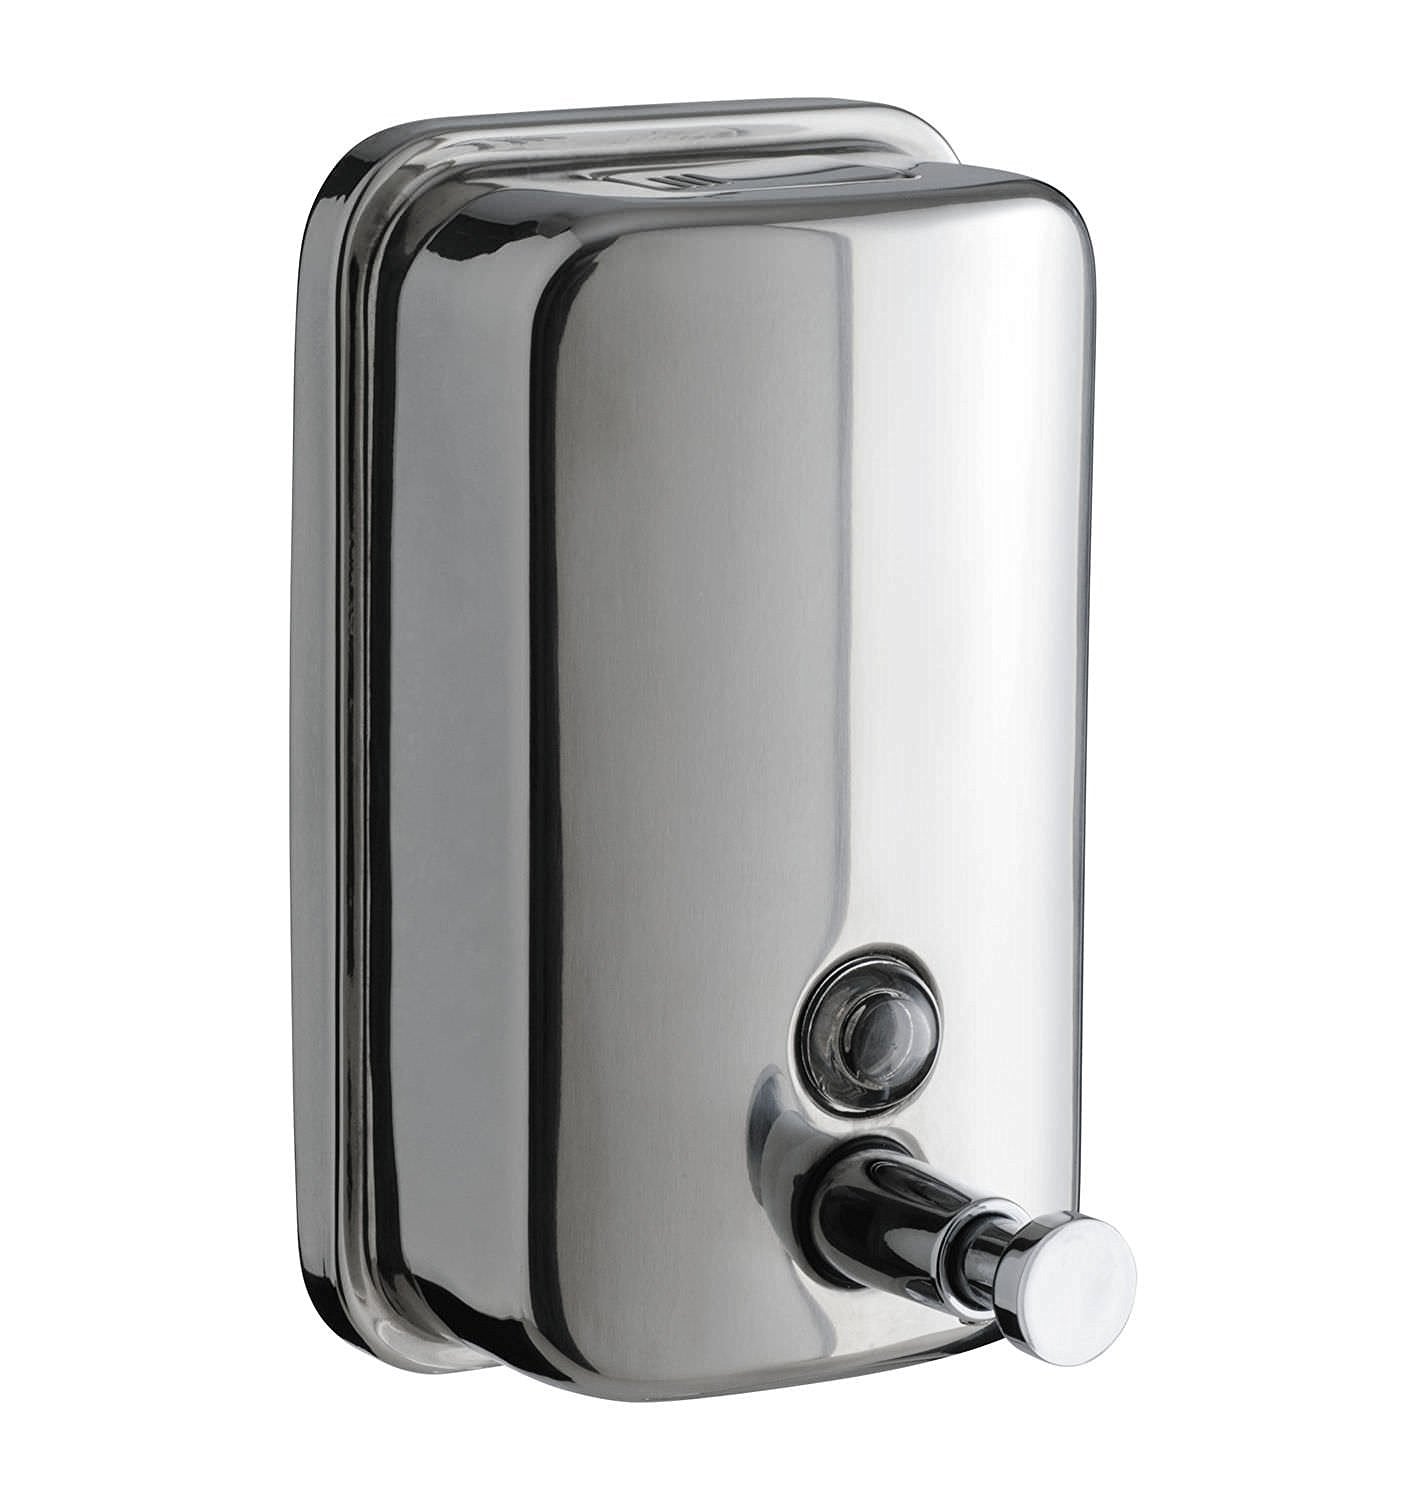 Stainless steel soap dispenser wall mounted